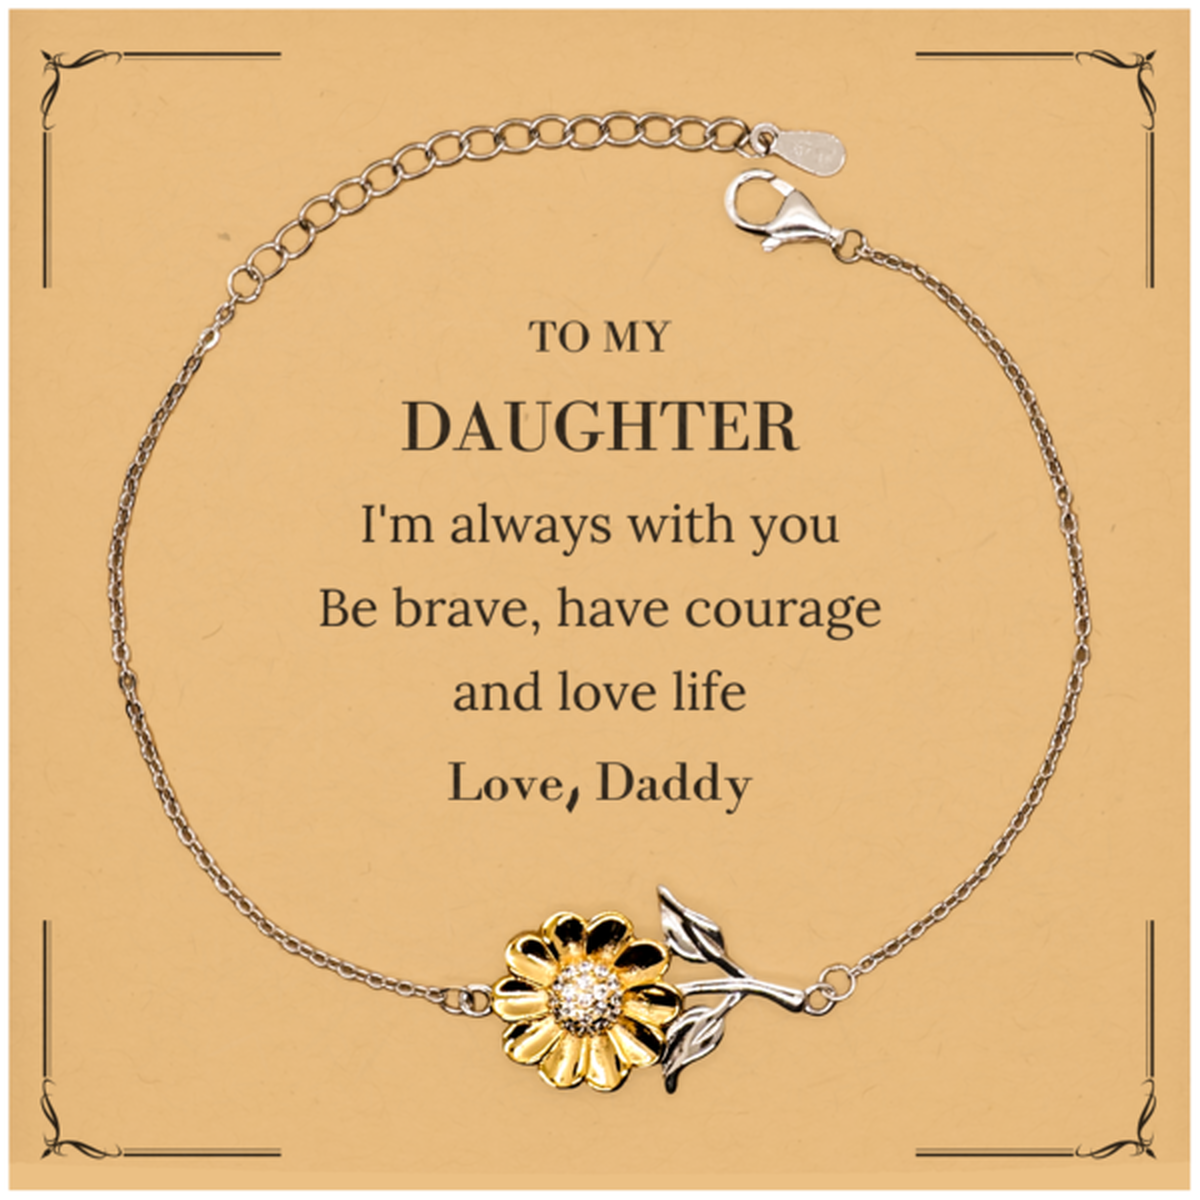 To My Daughter Gifts from Daddy, Unique Sunflower Bracelet Inspirational Christmas Birthday Graduation Gifts for Daughter I'm always with you. Be brave, have courage and love life. Love, Daddy